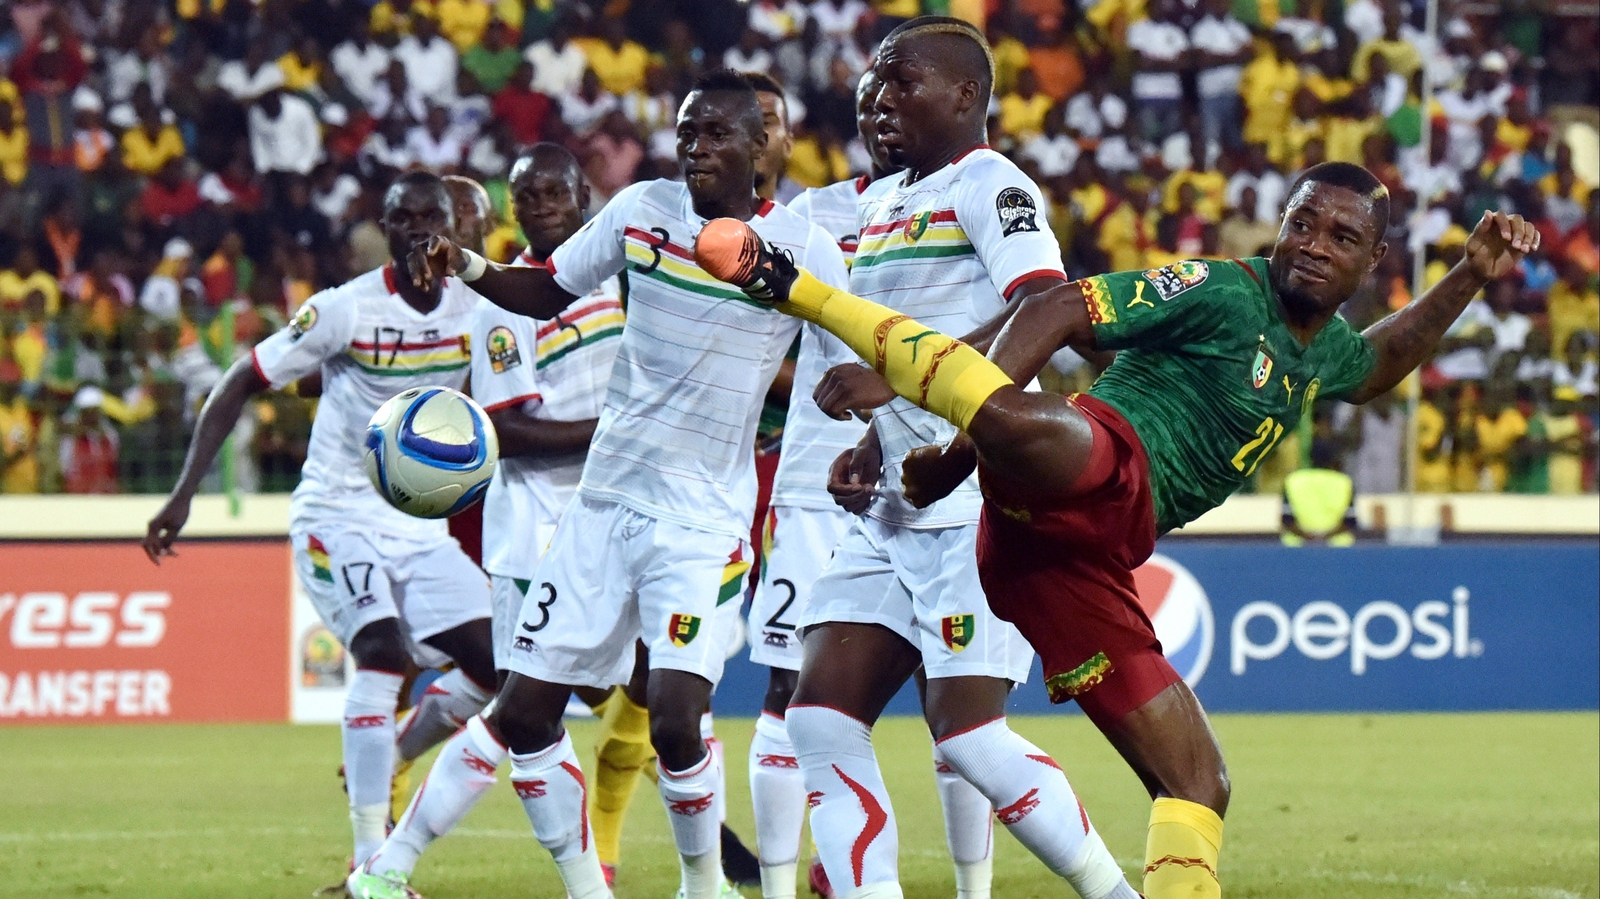 Guinea and Cameroon ends all square